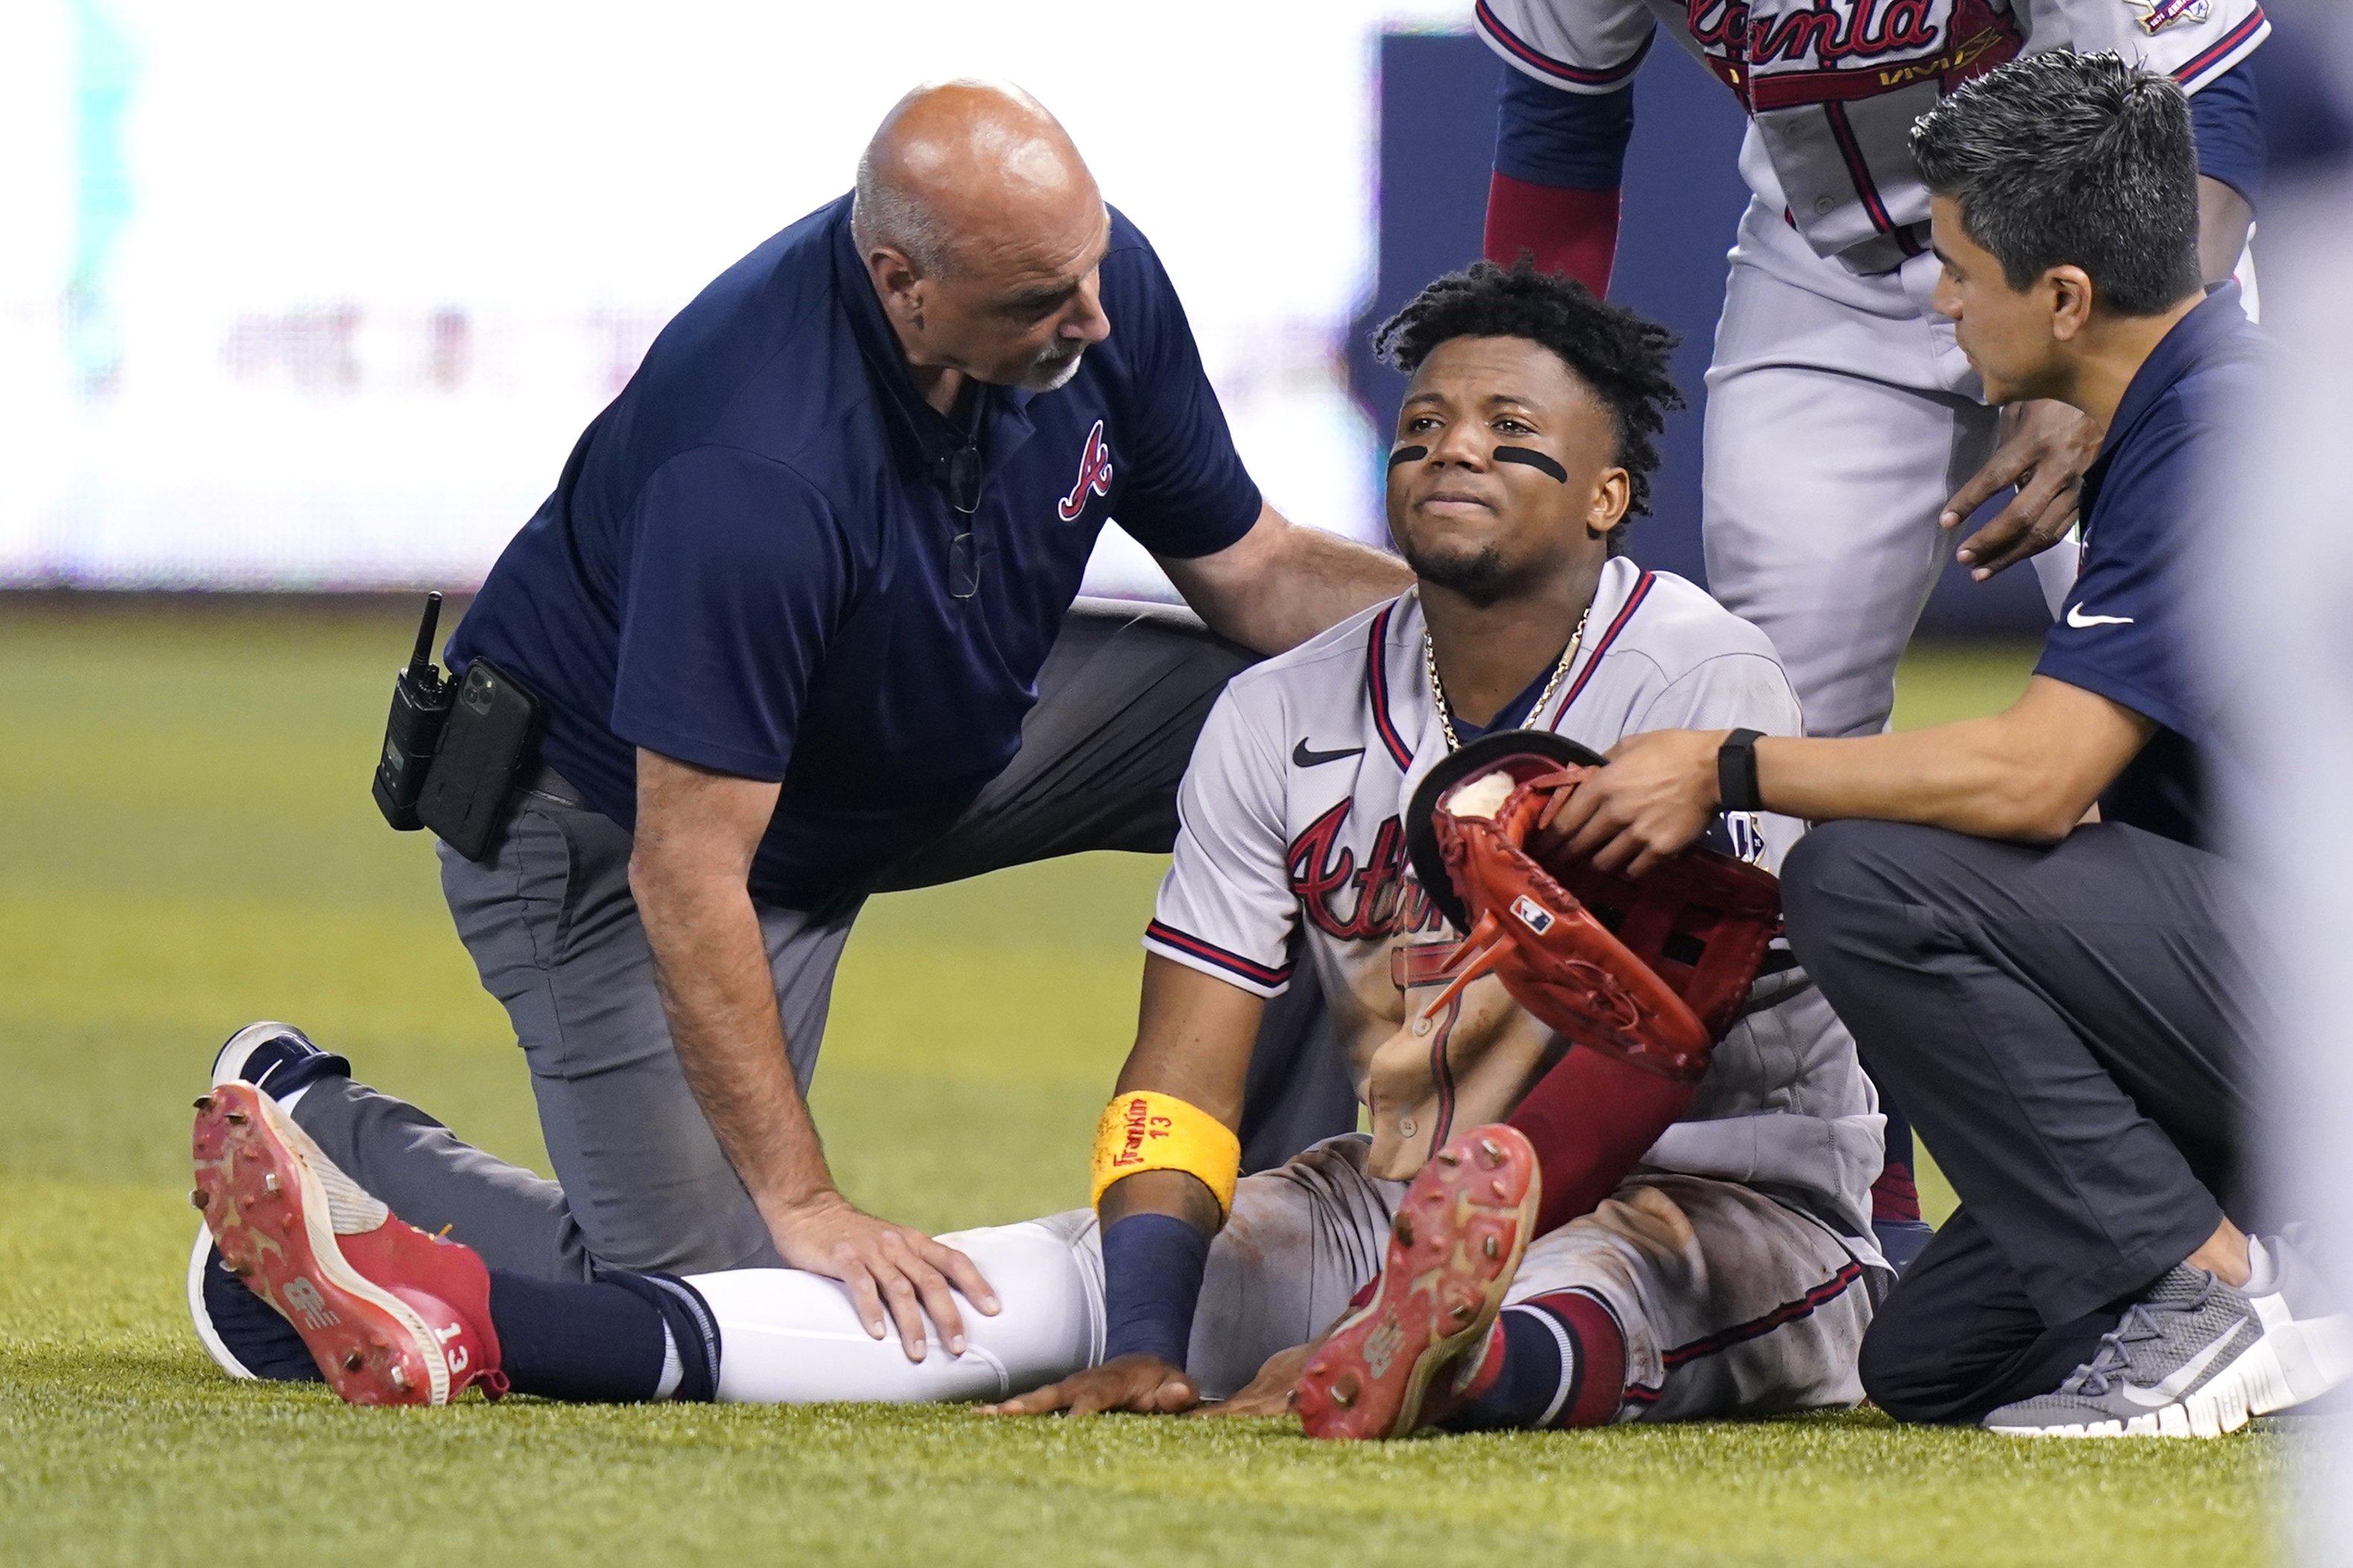 Braves' Ronald Acuna Jr. Undergoes Surgery After Suffering Torn